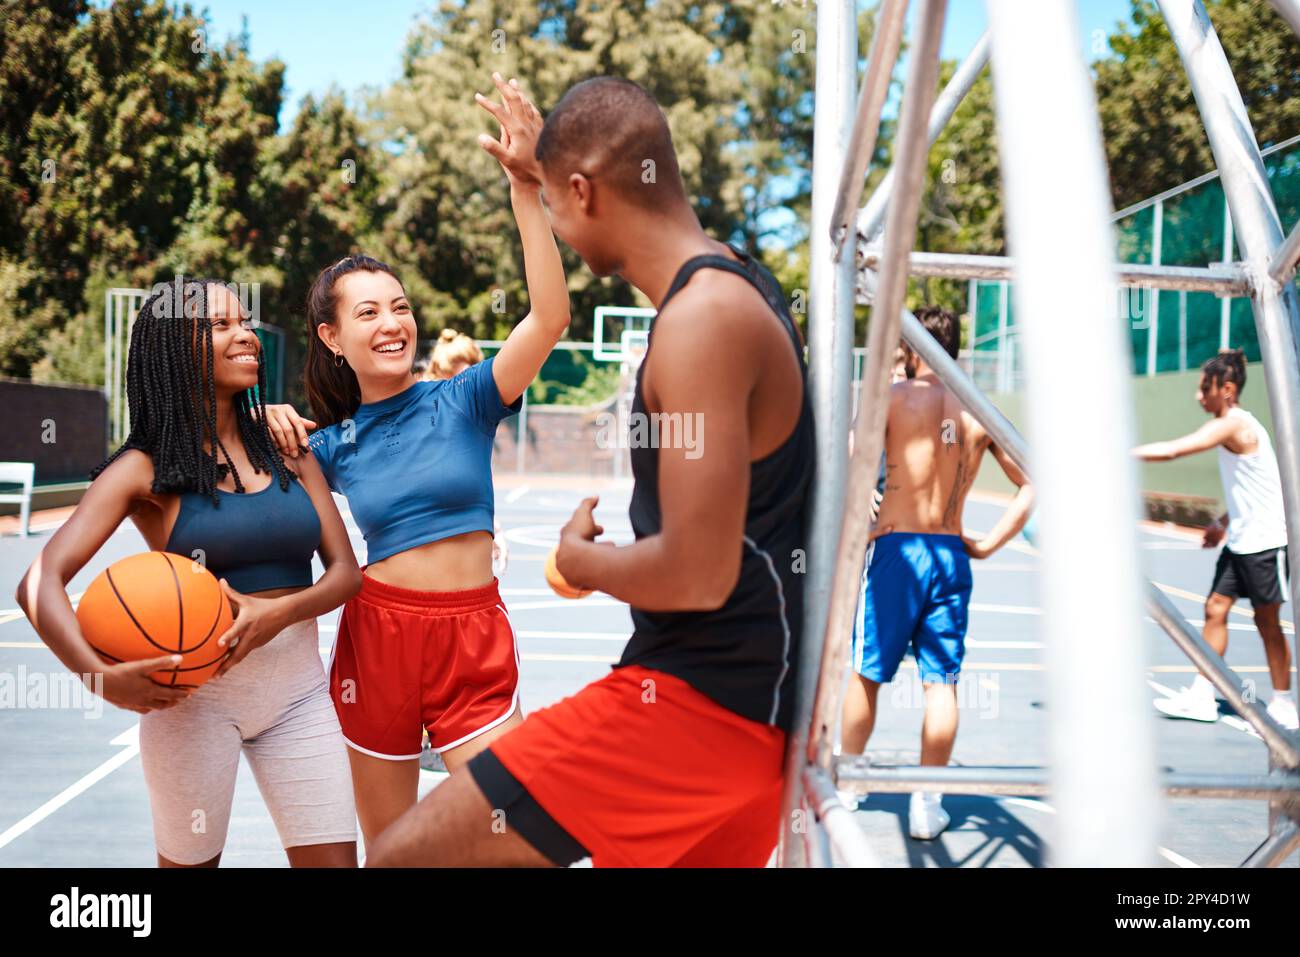 What an awesome game that was. a sporty young woman giving her teammate a high five on a basketball court. Stock Photo